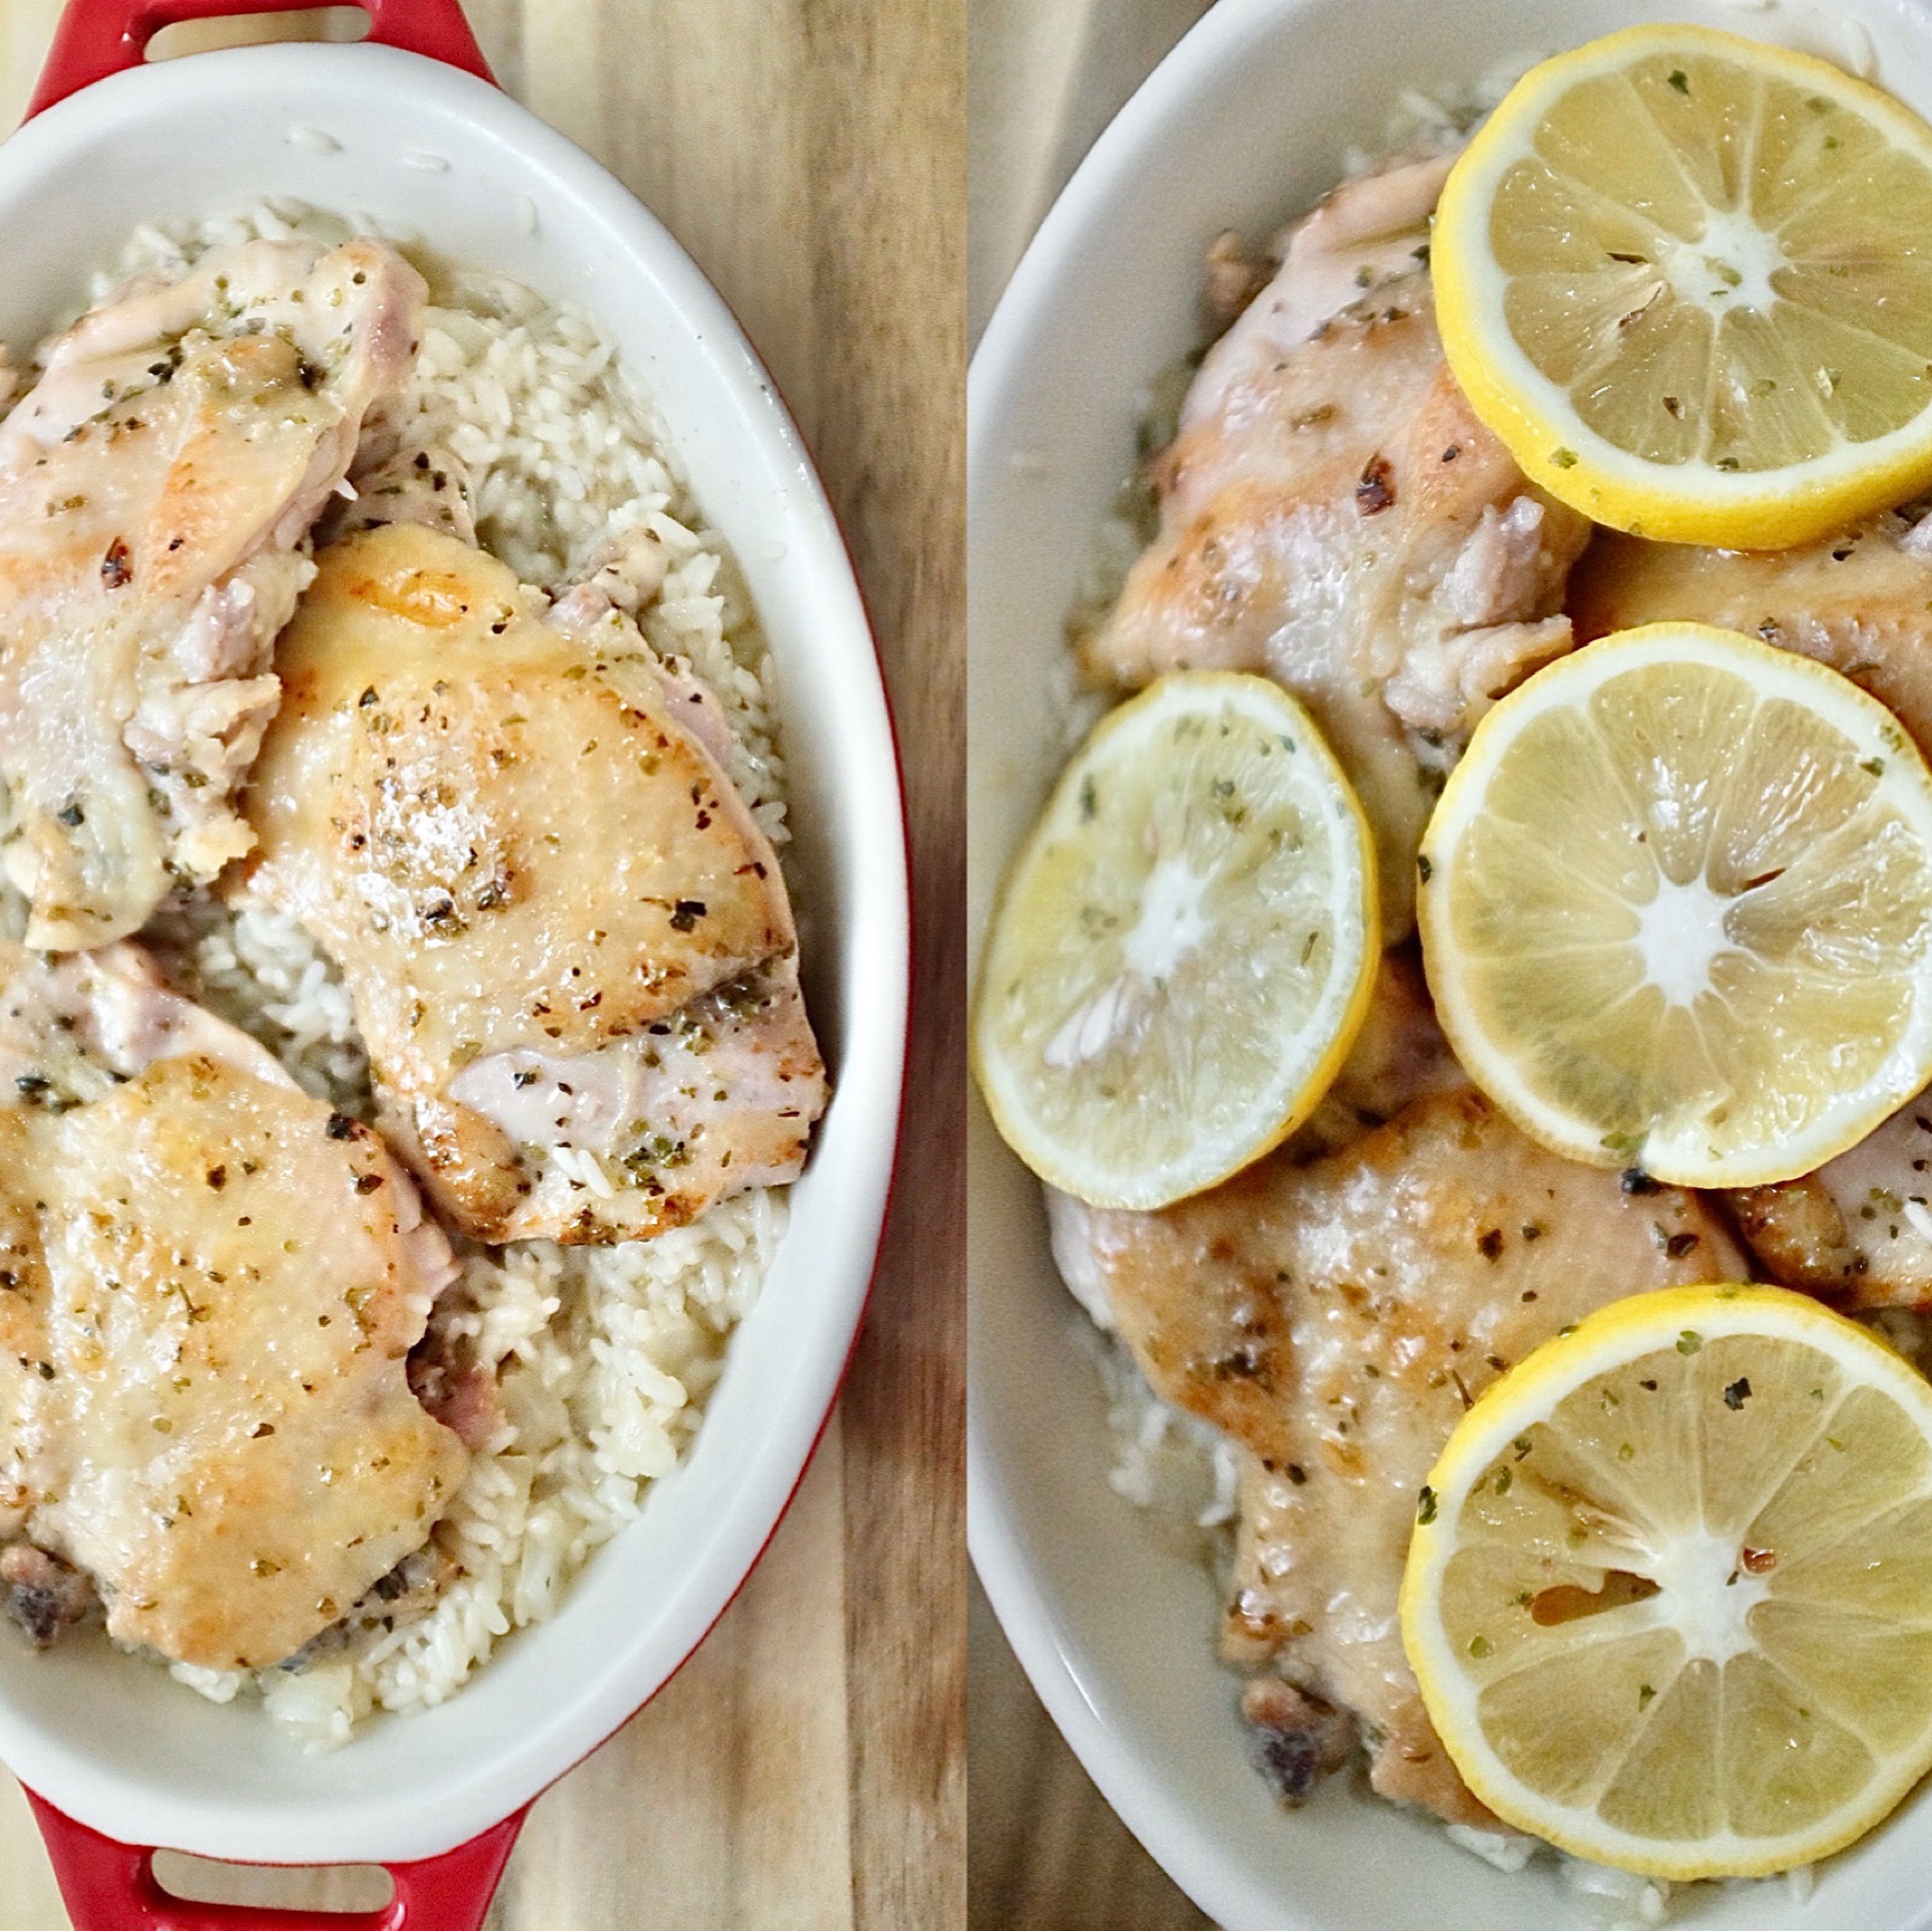 Preheat the oven to 200c. Place the rice into a deep roasting pan and add the chicken thighs and lemon on it .